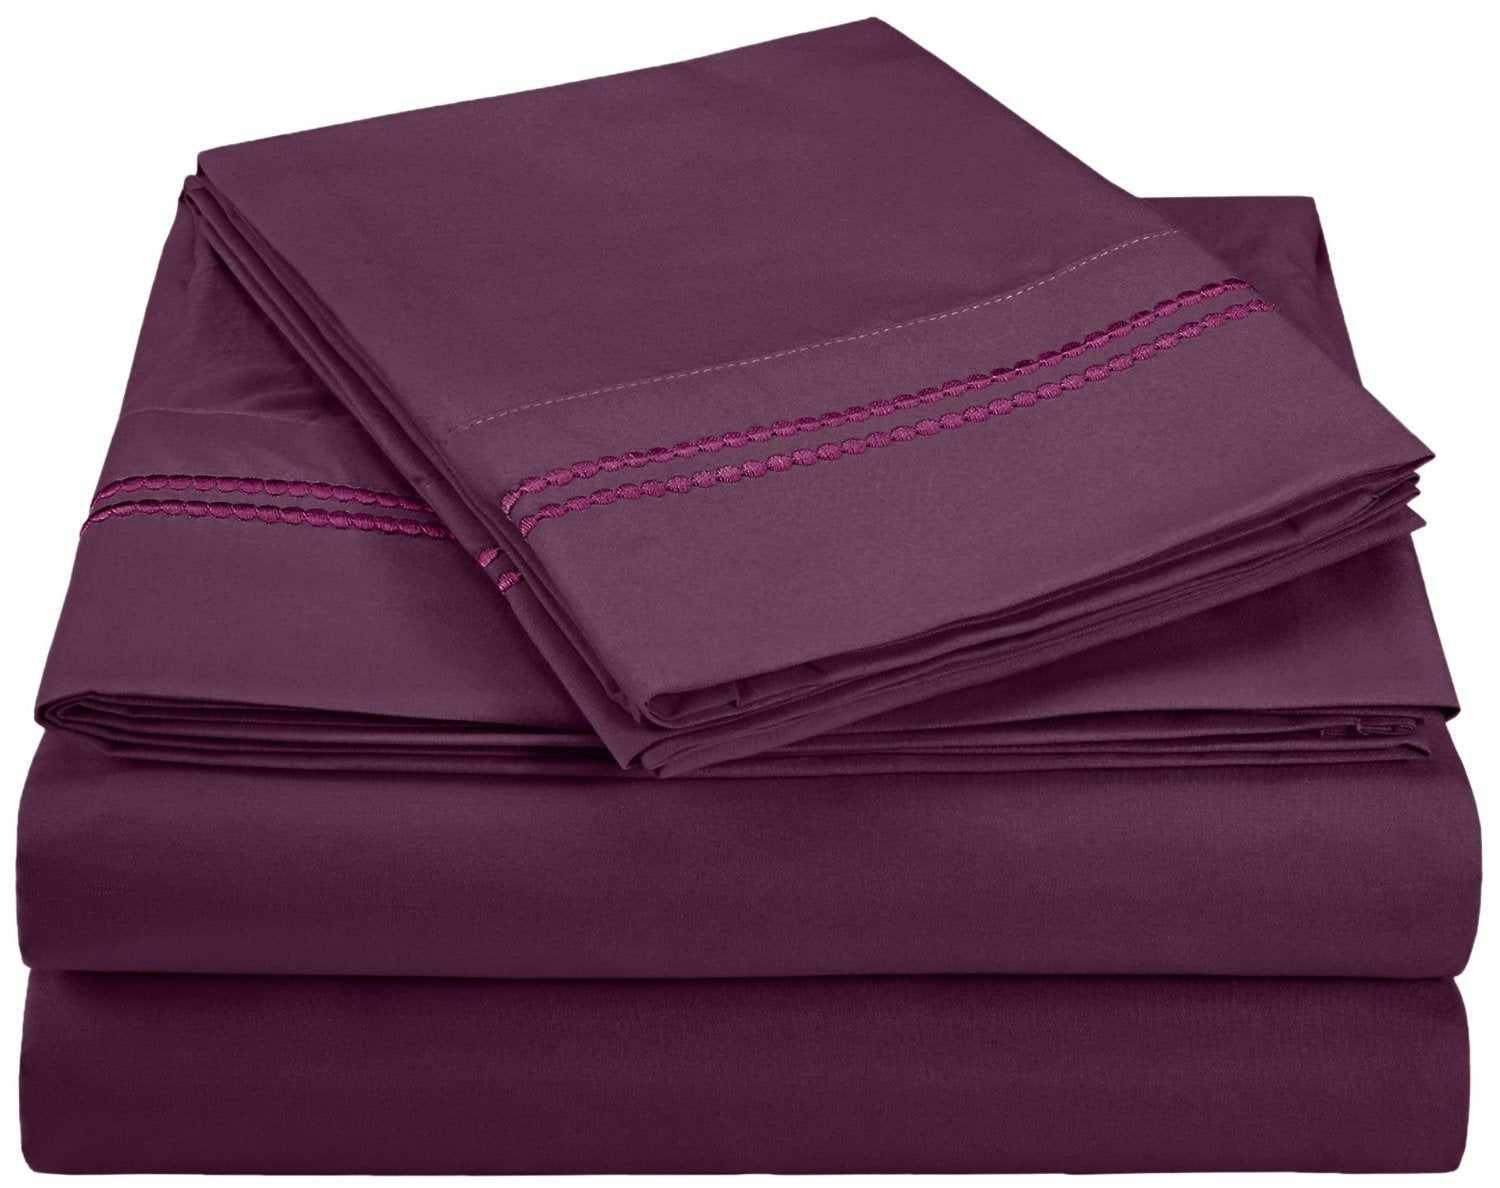 Superior 3000 Series Wrinkle Resistant 2 Line Embroidery Sheet Set - Plum